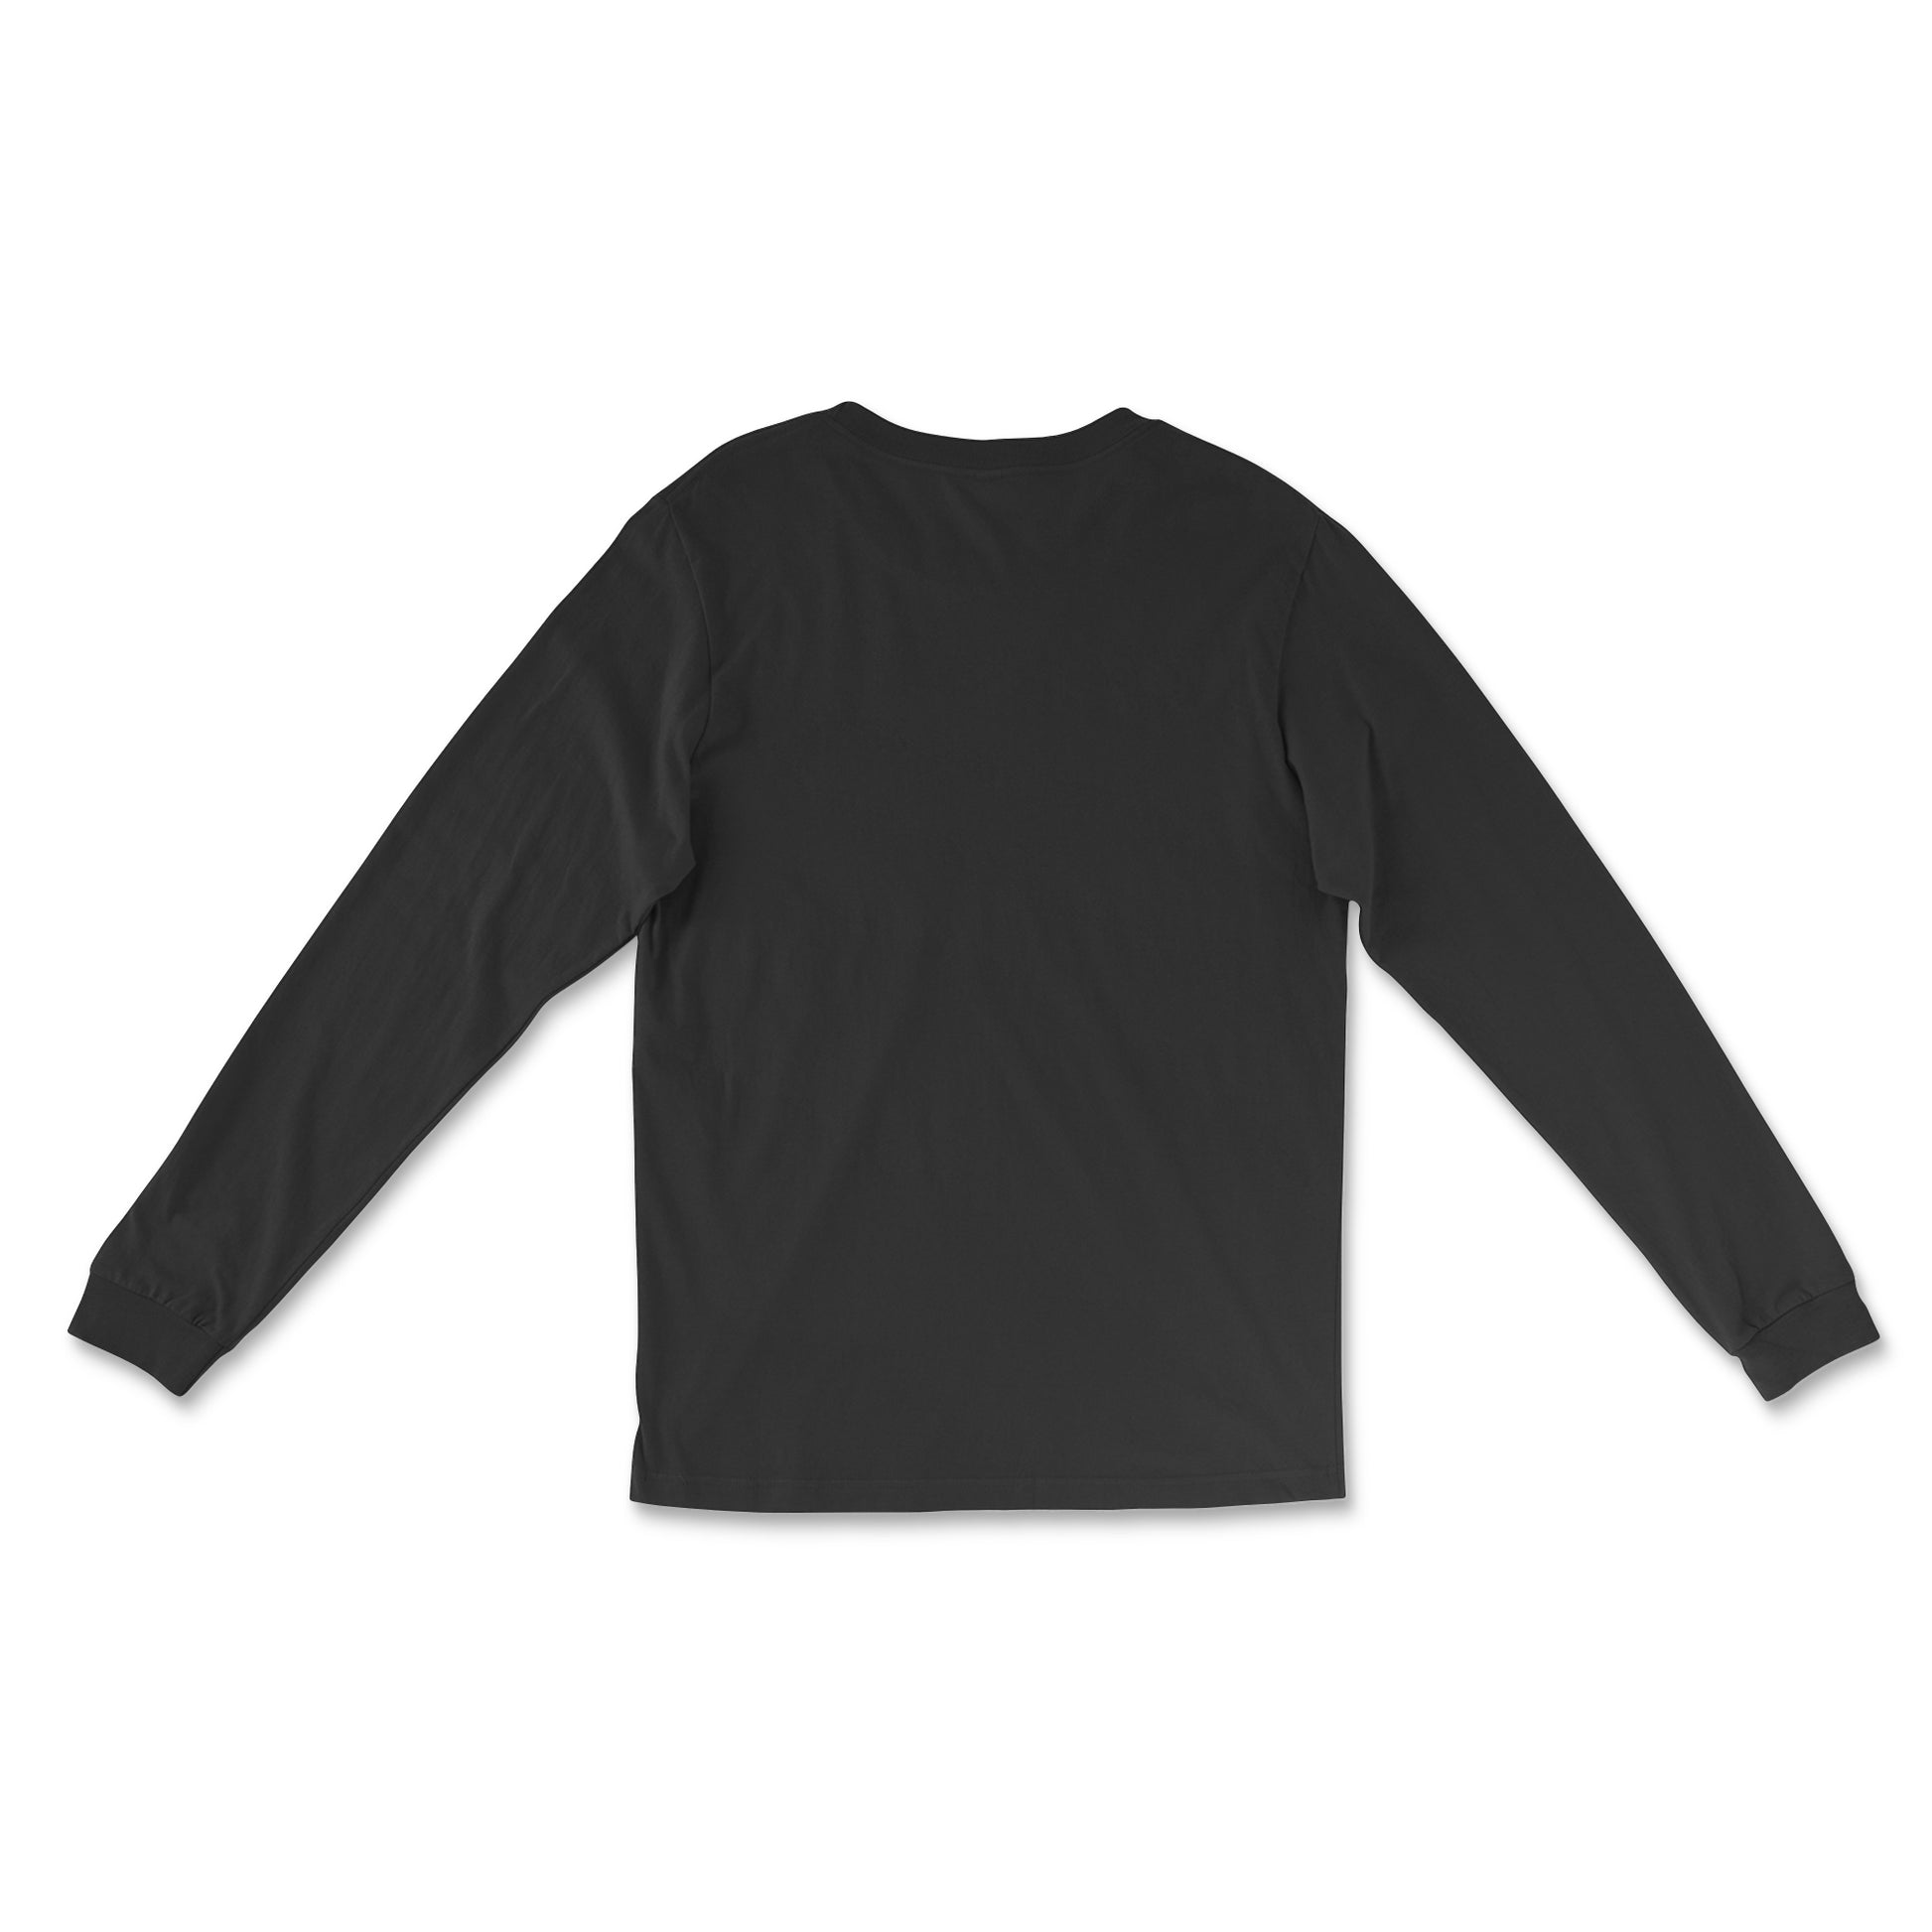 Back view - Graphic black cotton long sleeve t-shirt, versatile wardrobe essential for streetwear or layering. Classic long sleeve tee in black, ideal for everyday comfort and style.